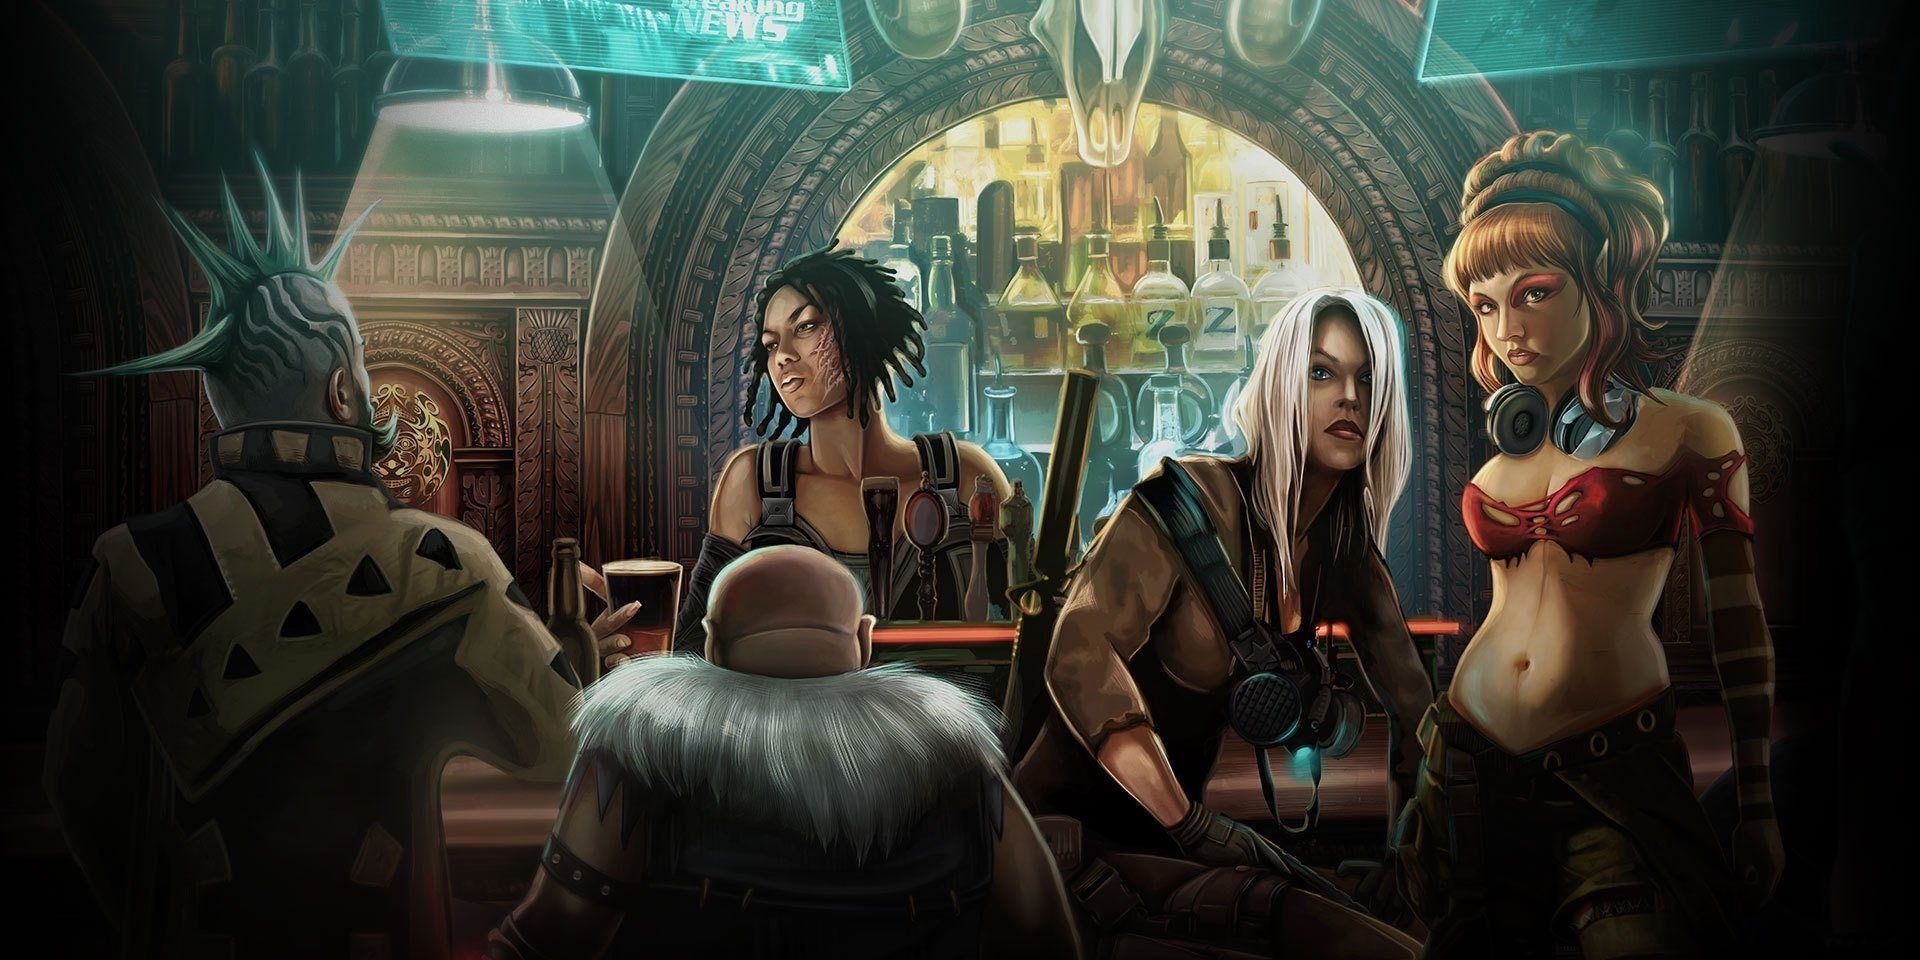 Shadowrun: Why You Should Try the Beloved Cyberpunk Tabletop RPG